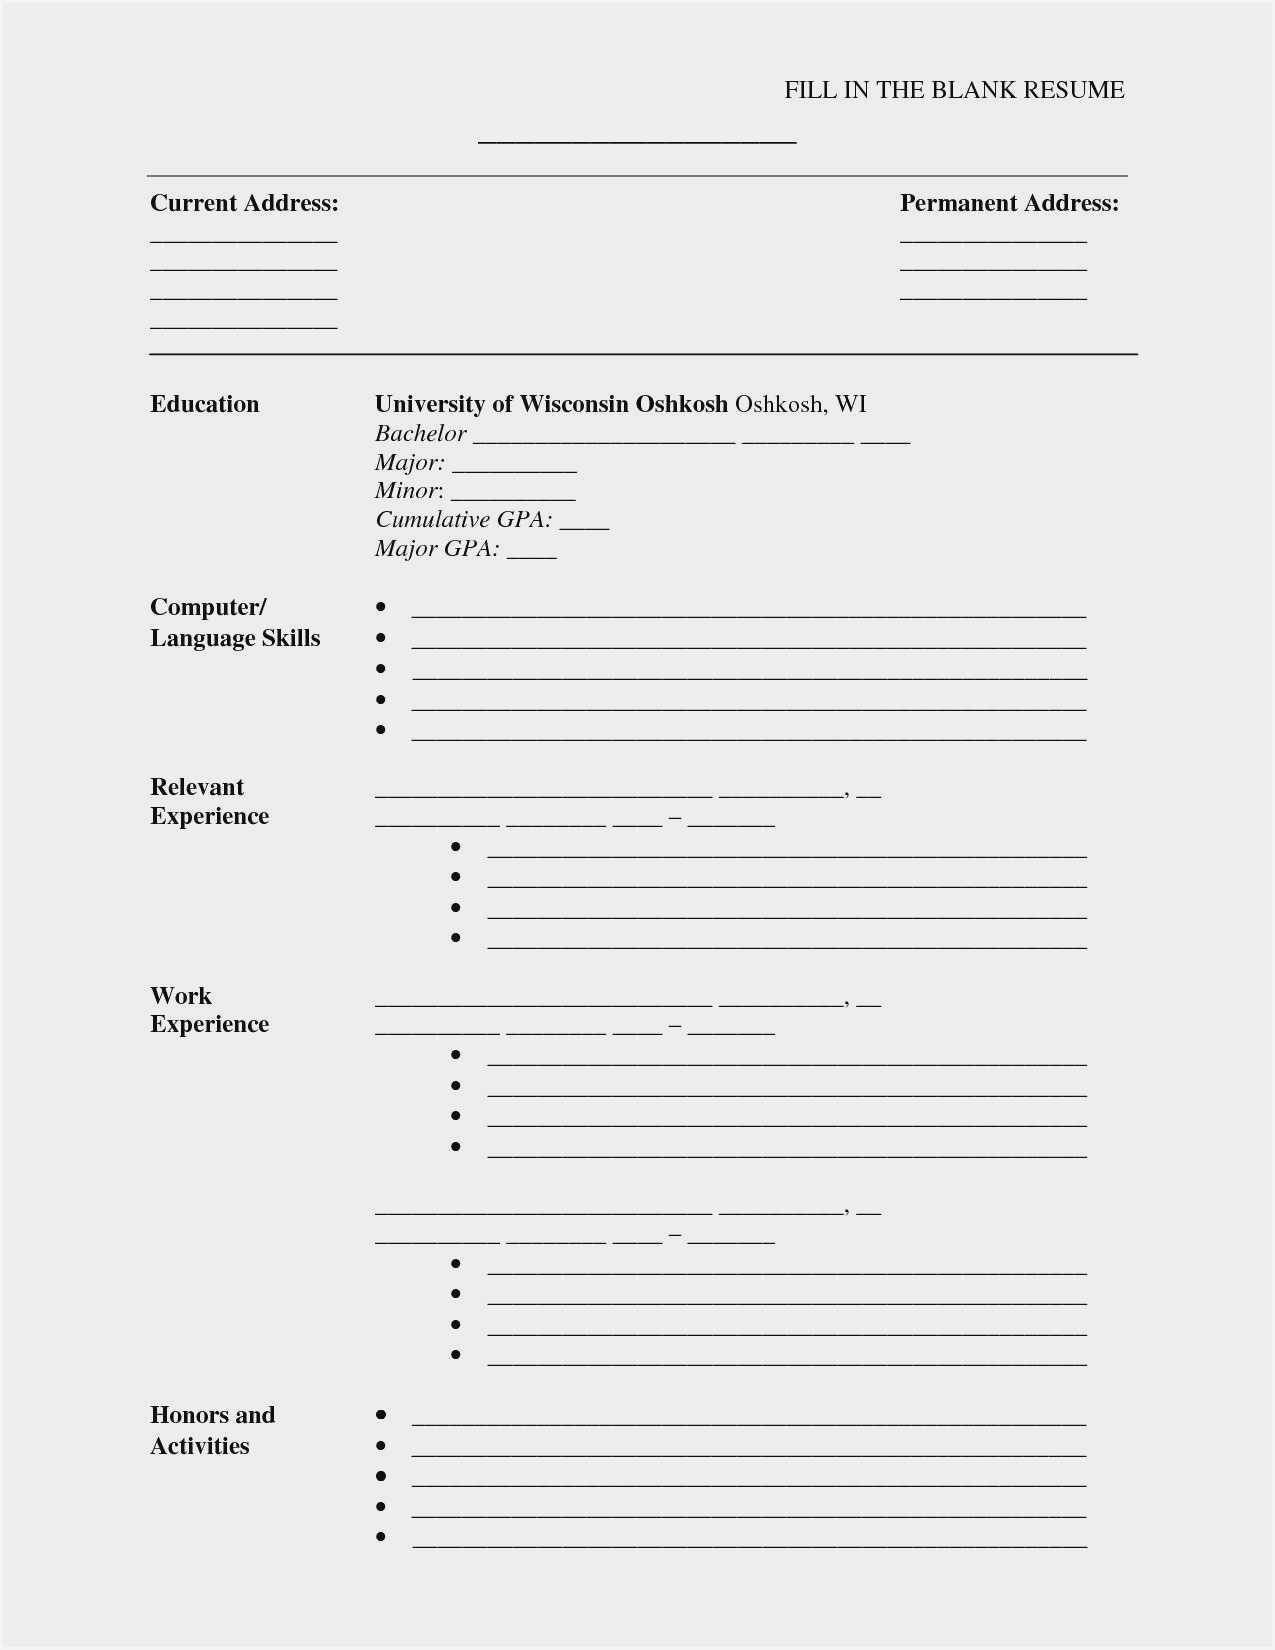 Blank Cv Format Word Download - Resume : Resume Sample #3945 With Free Blank Cv Template Download